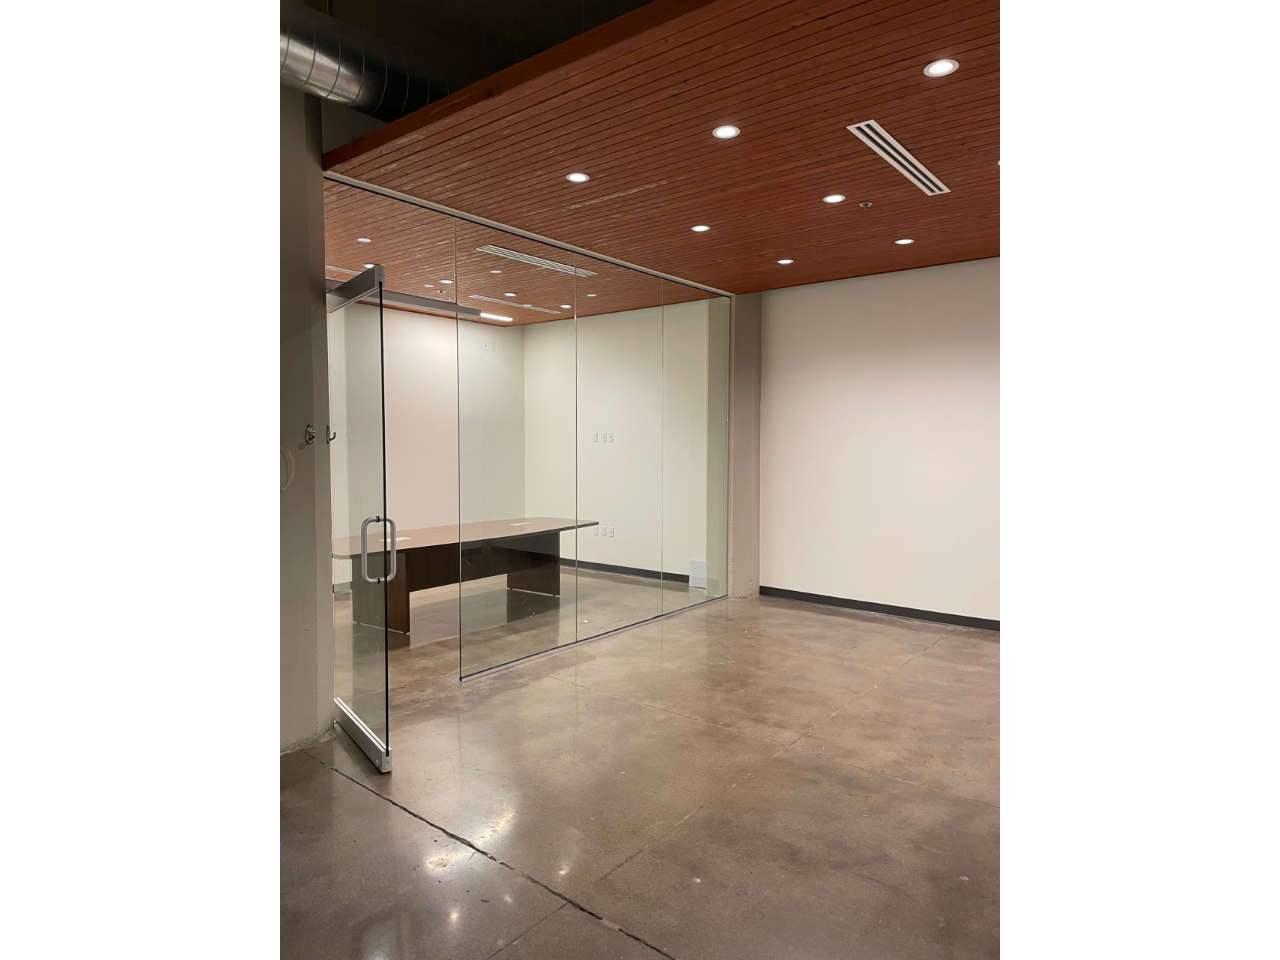 waterman-120-Conference-Room-3